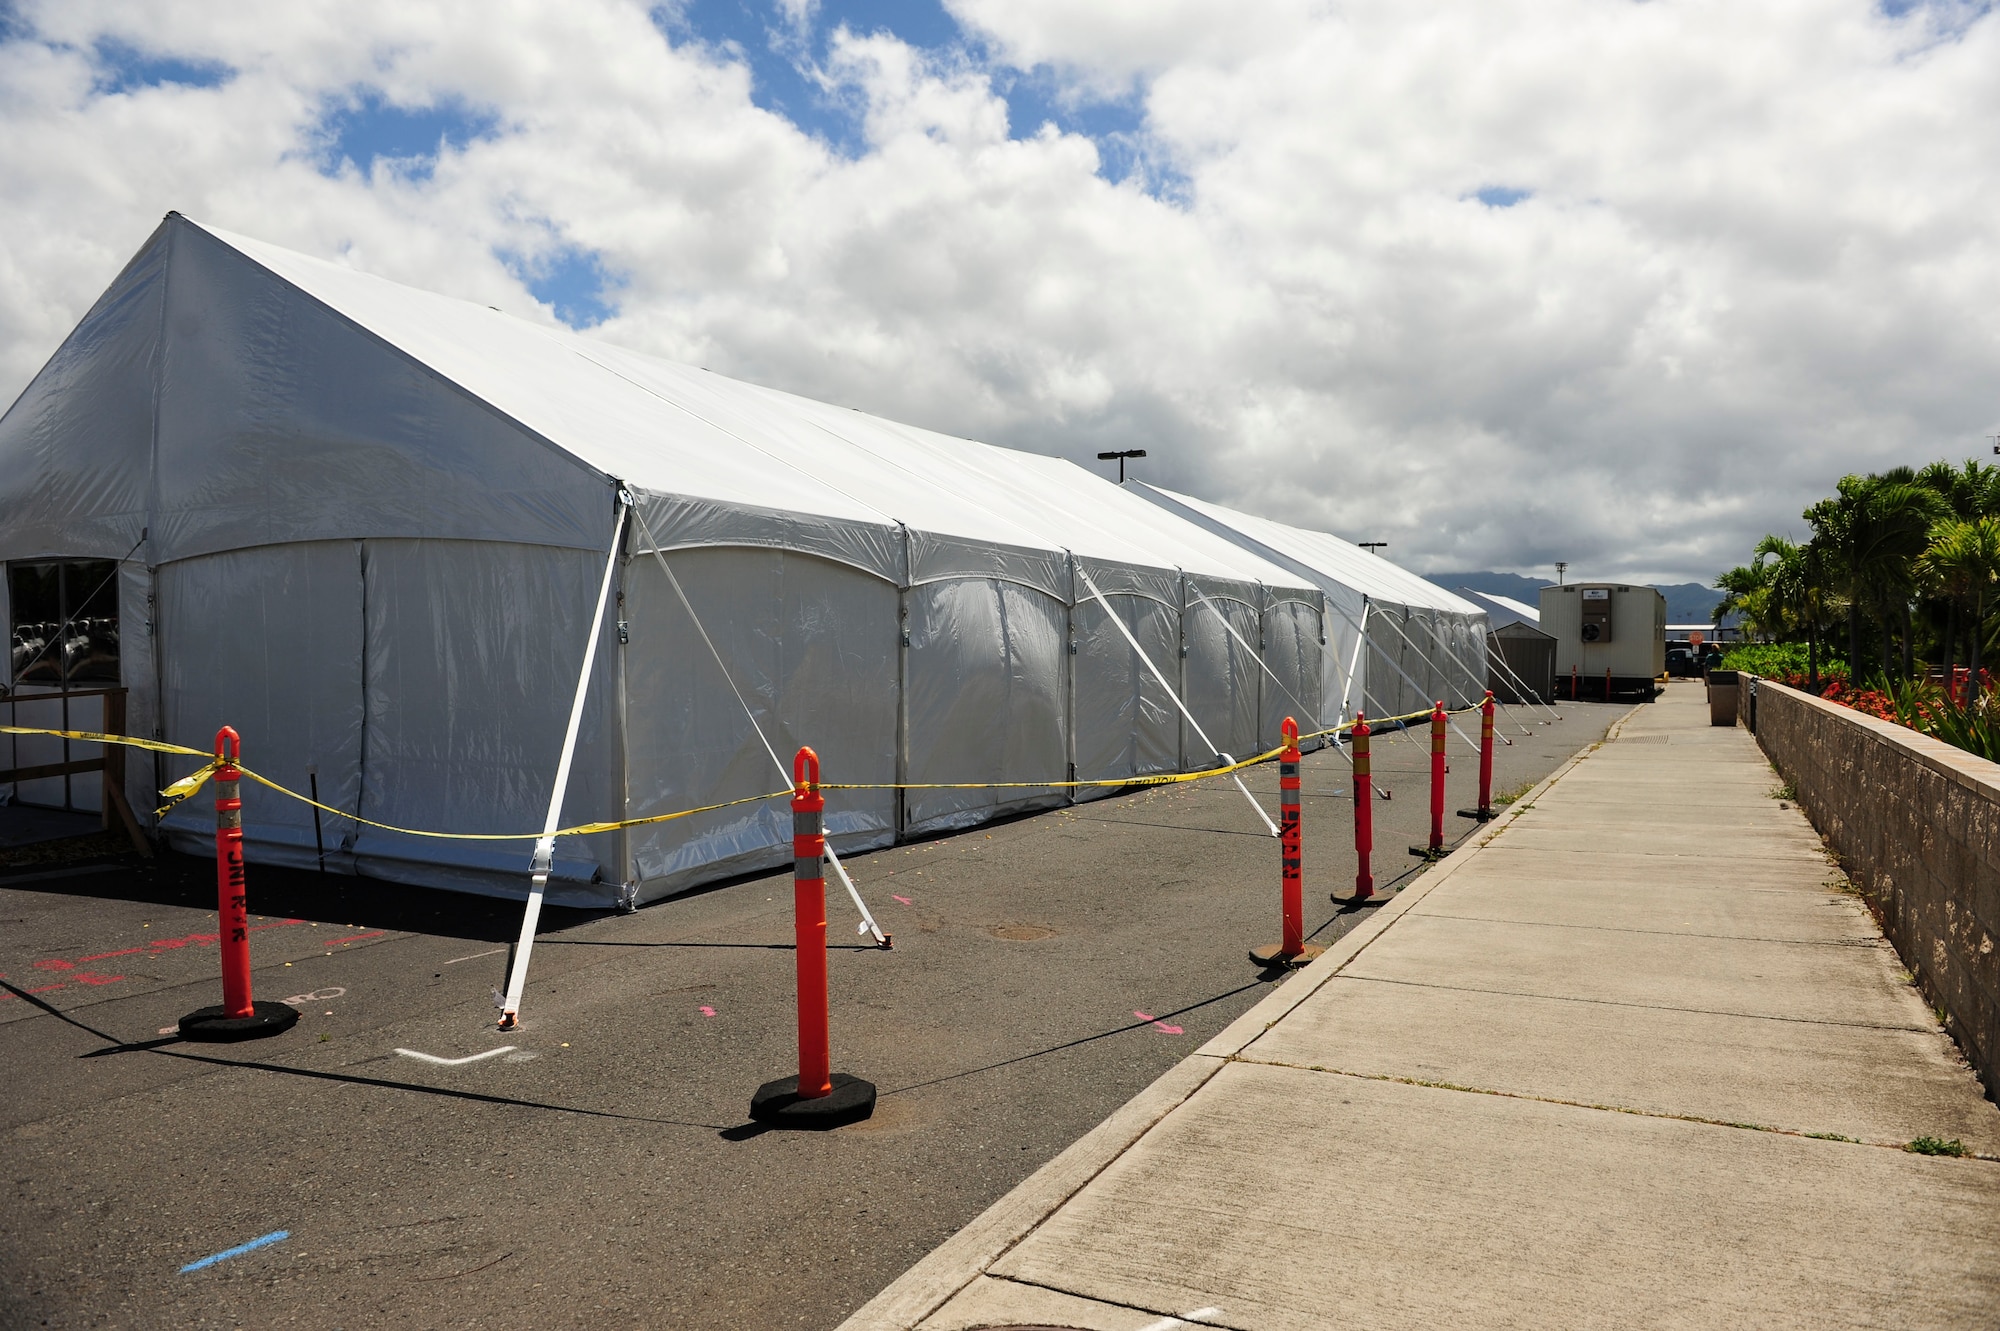 Air Mobility Command’s Space-A Passenger Terminal on Joint Base Pearl Harbor-Hickam, Hawaii, entered Phase II of its renovation plan, May 22, 2017.  Phase II involves the shutdown of the main concourse with services operating out of temporary tents. Anticipated completion of the $20.5 million dollar infrastructure project is set for Spring 2018. (U.S. Air Force photo by Tech. Sgt. Heather Redman)